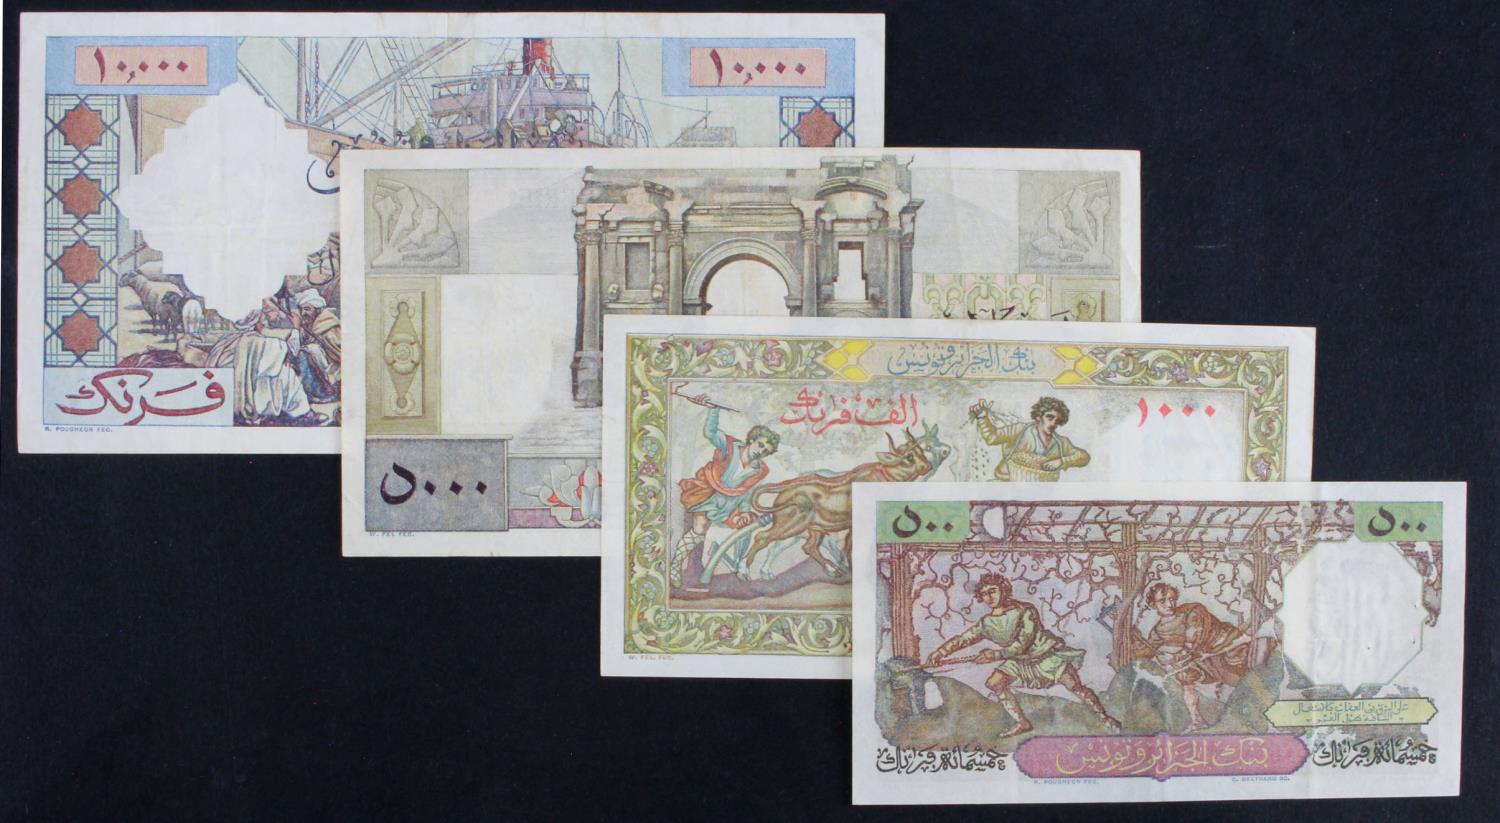 Algeria (4), 10000, 5000, 1000 and 500 Francs dated 1957, 1947, 1949 and 1952 respectively (BNB B201 - Image 2 of 2